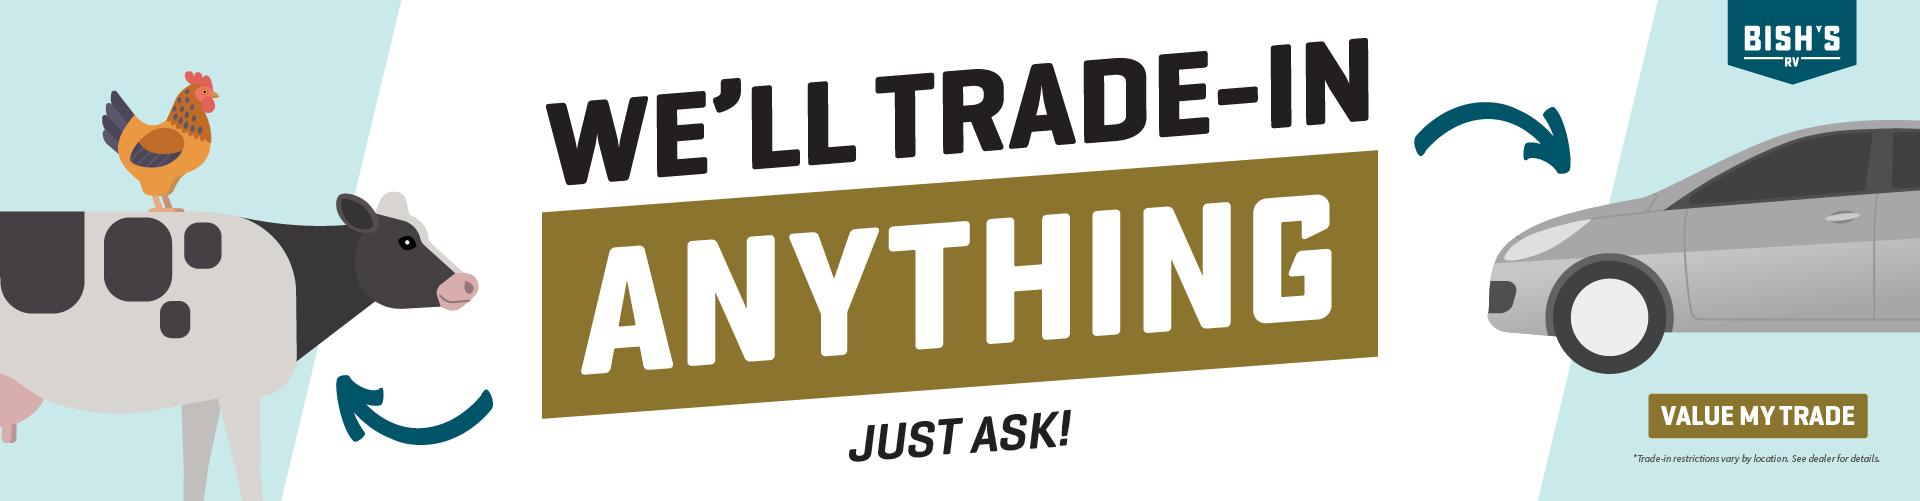 We'll Trade-In Anything - Just Ask! Value My Trade